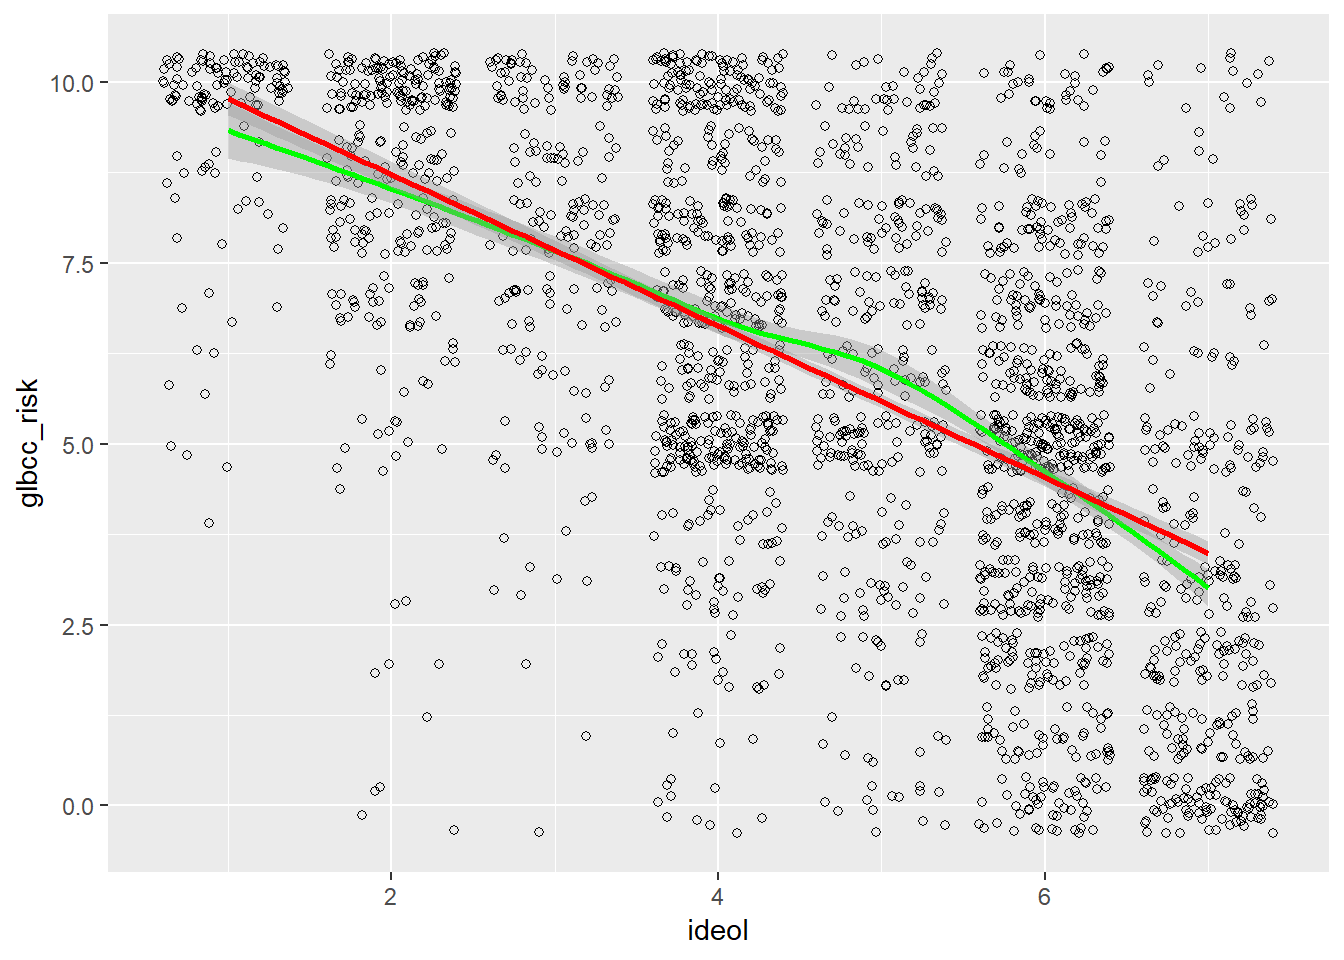 Scatterplot of Ideology and GLBCC Risk with Regression Line and Lowess Line